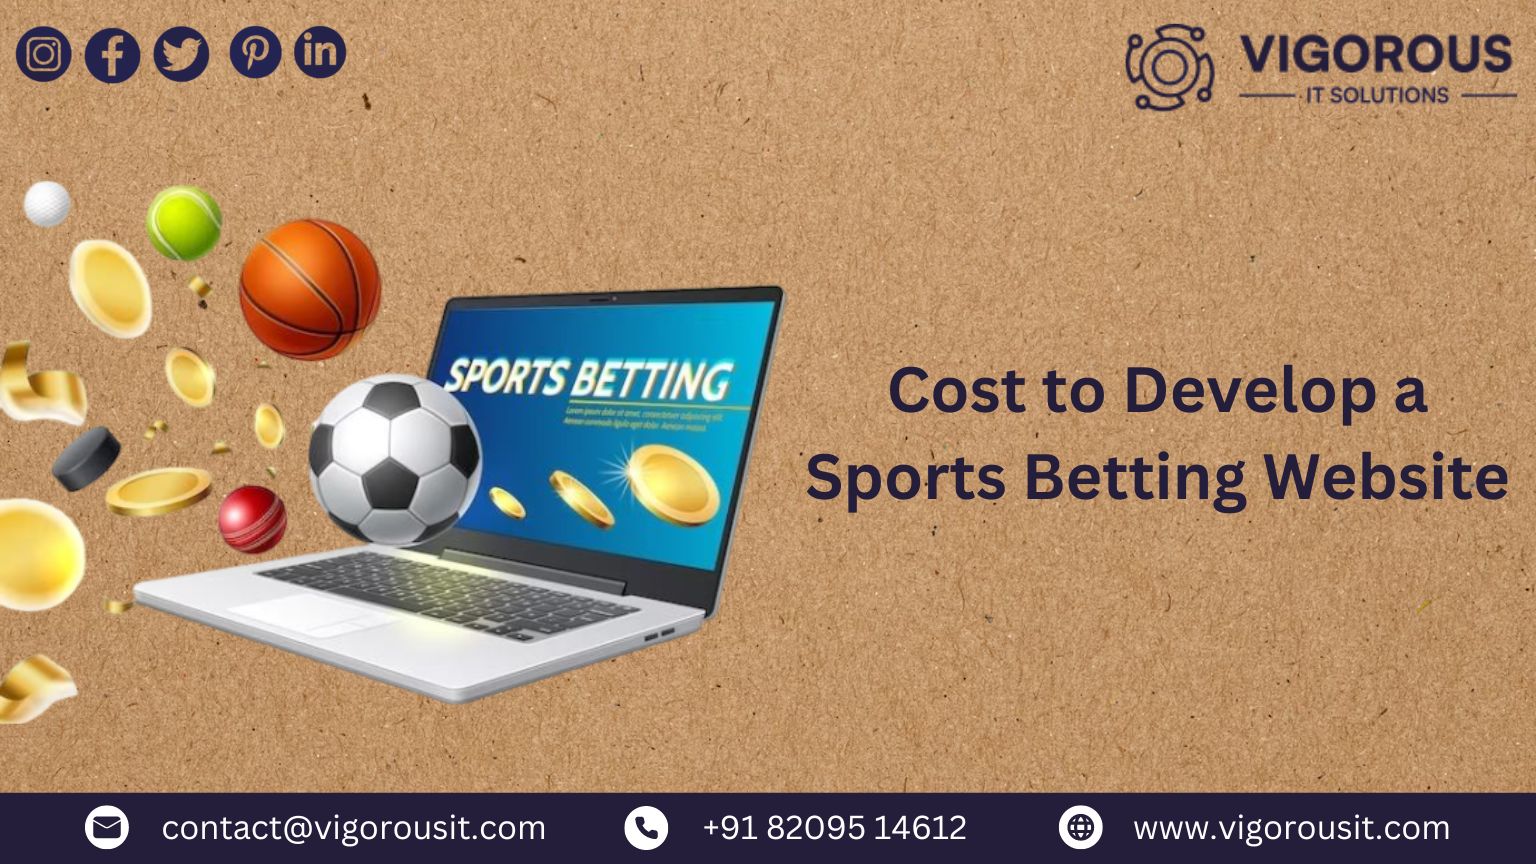 Cost to Develop a Sports Betting Website